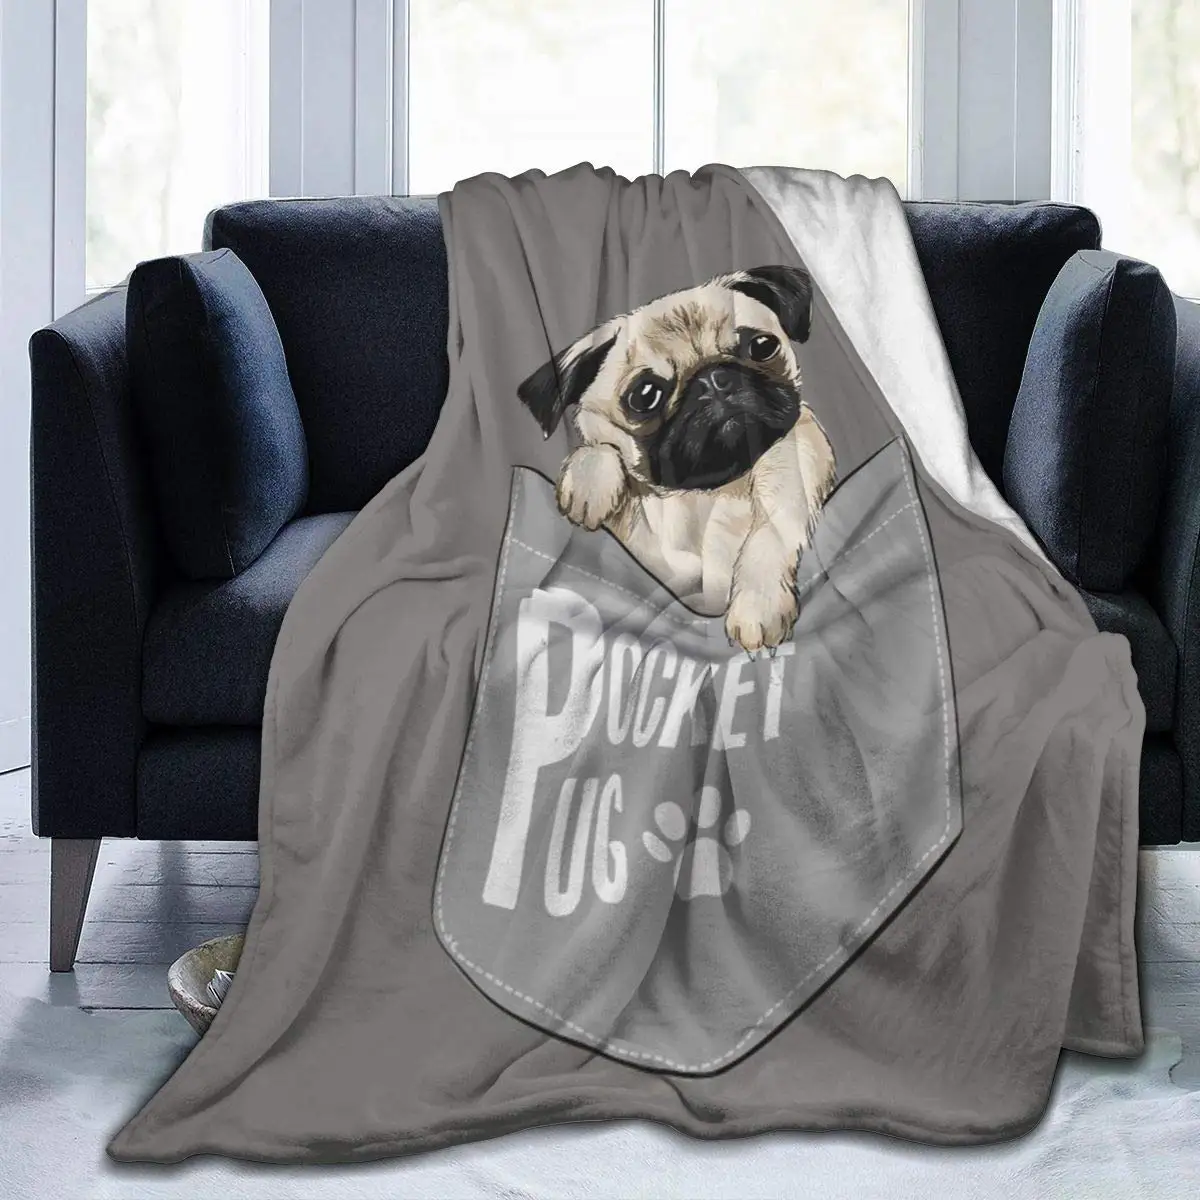 

Flannel Throw Blanket Cute Pocket Pug Dog Cartoon Gray Cozy&Soft Plush Blankets for Bed Couch Living Room Sofa Chair